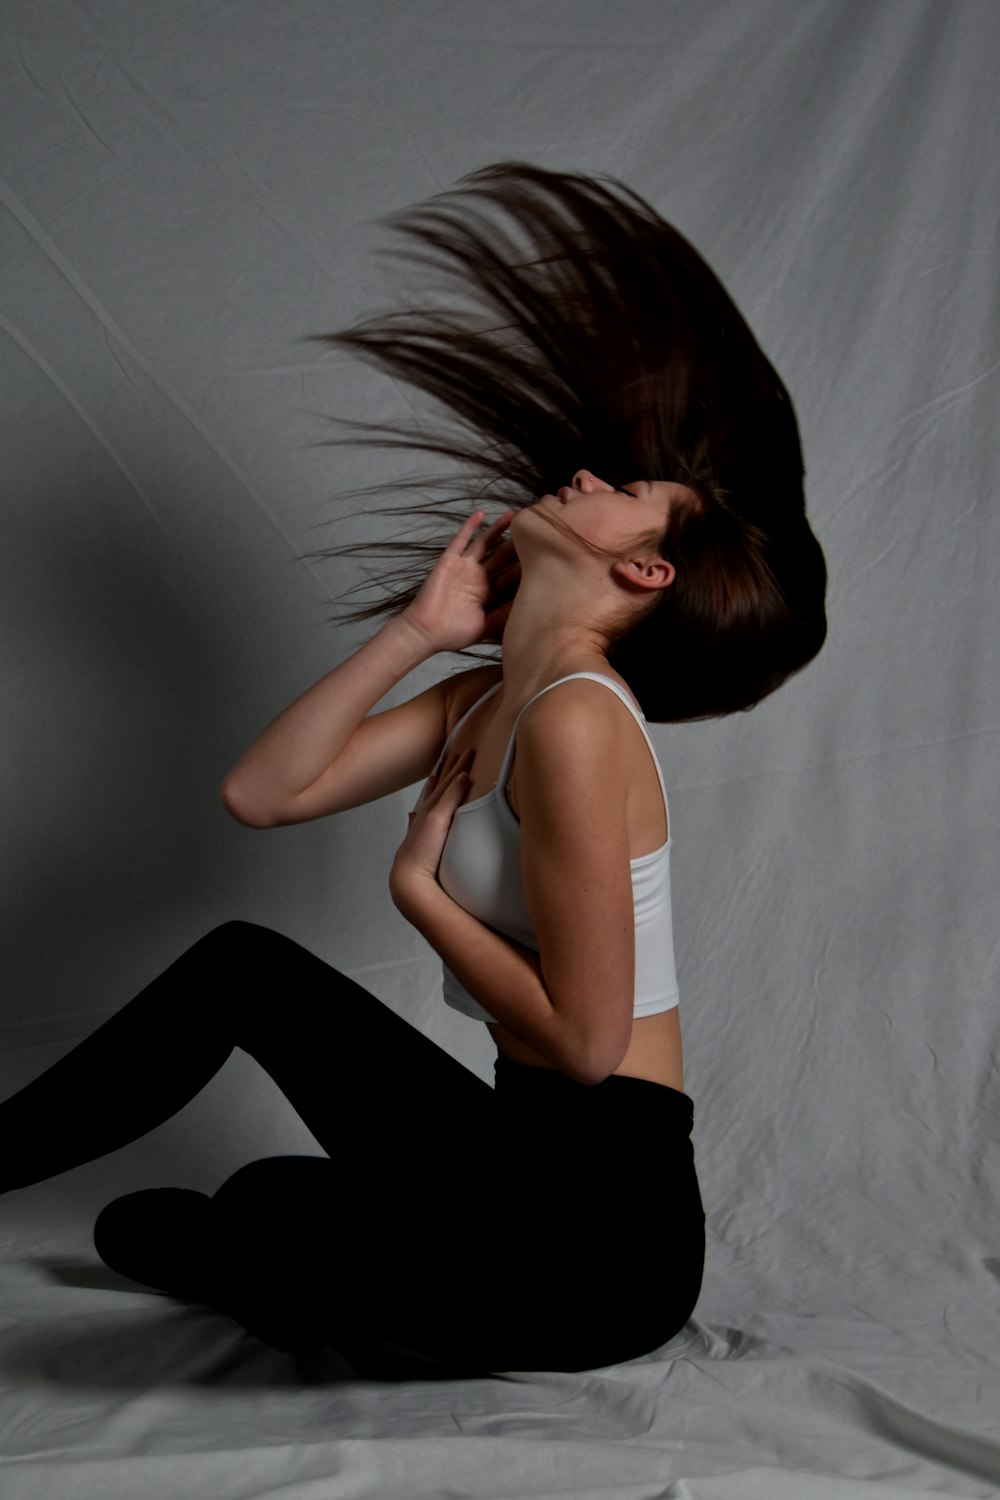 a woman sitting on the floor with her hair blowing in the wind